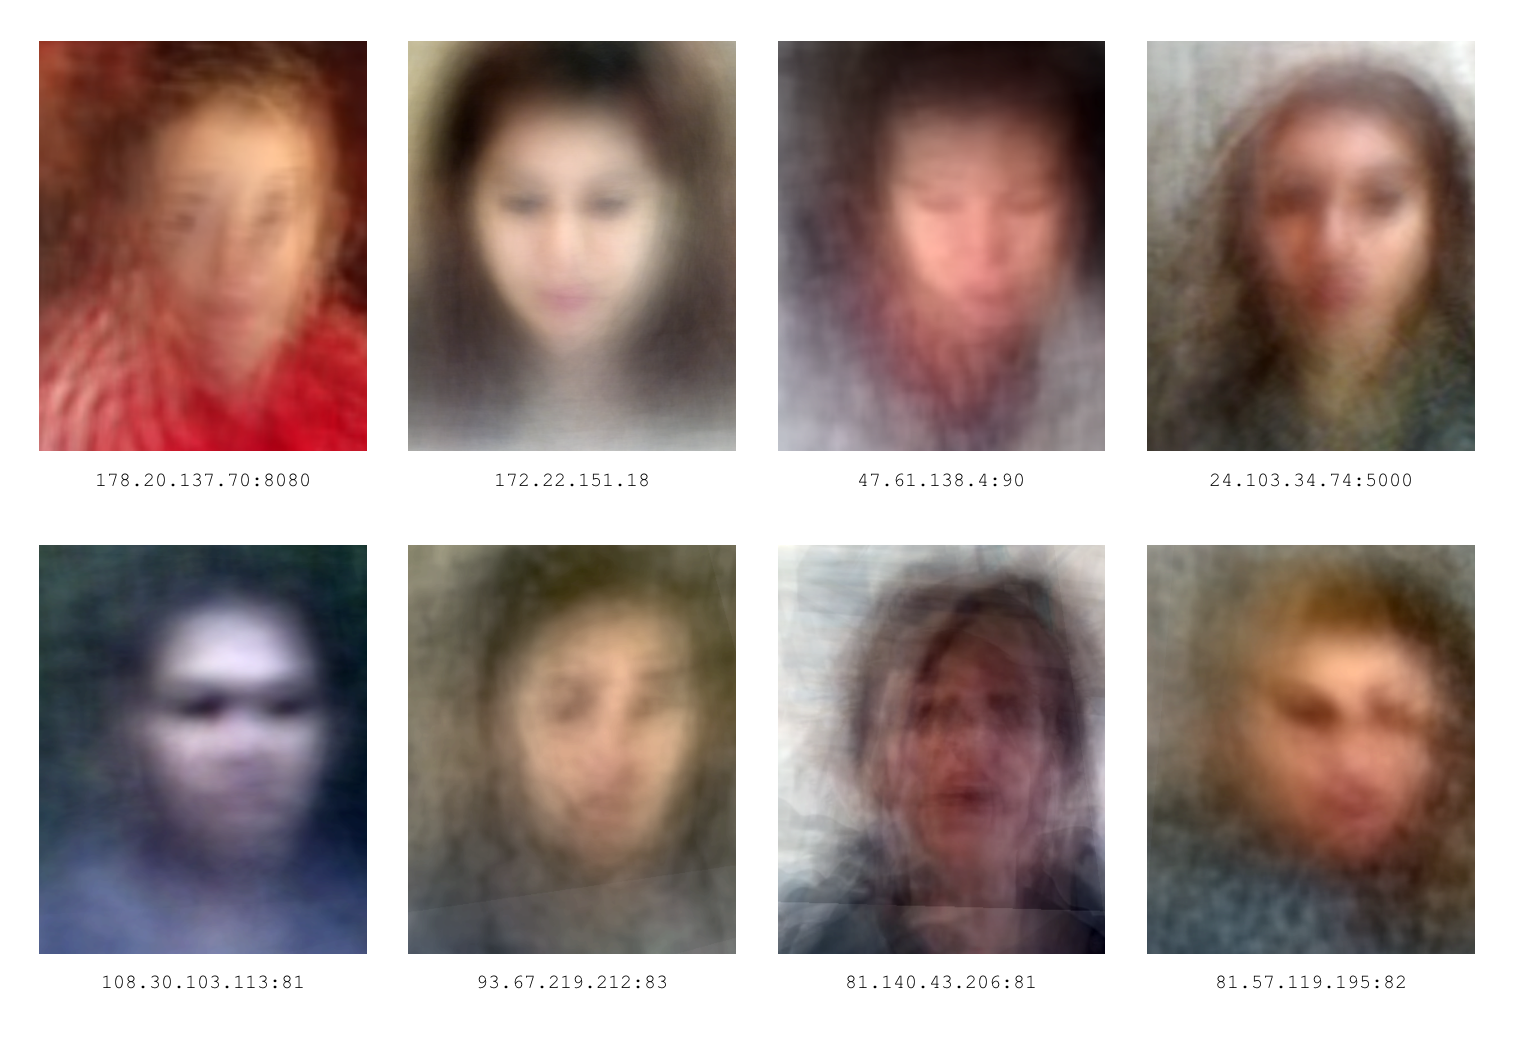 "Unfolding Prejudice" is a series of evolving portraits that are the accumulation of faces captured by security cameras. The portraits reflect the process of instantaneous and shifting prejudice across time and location.